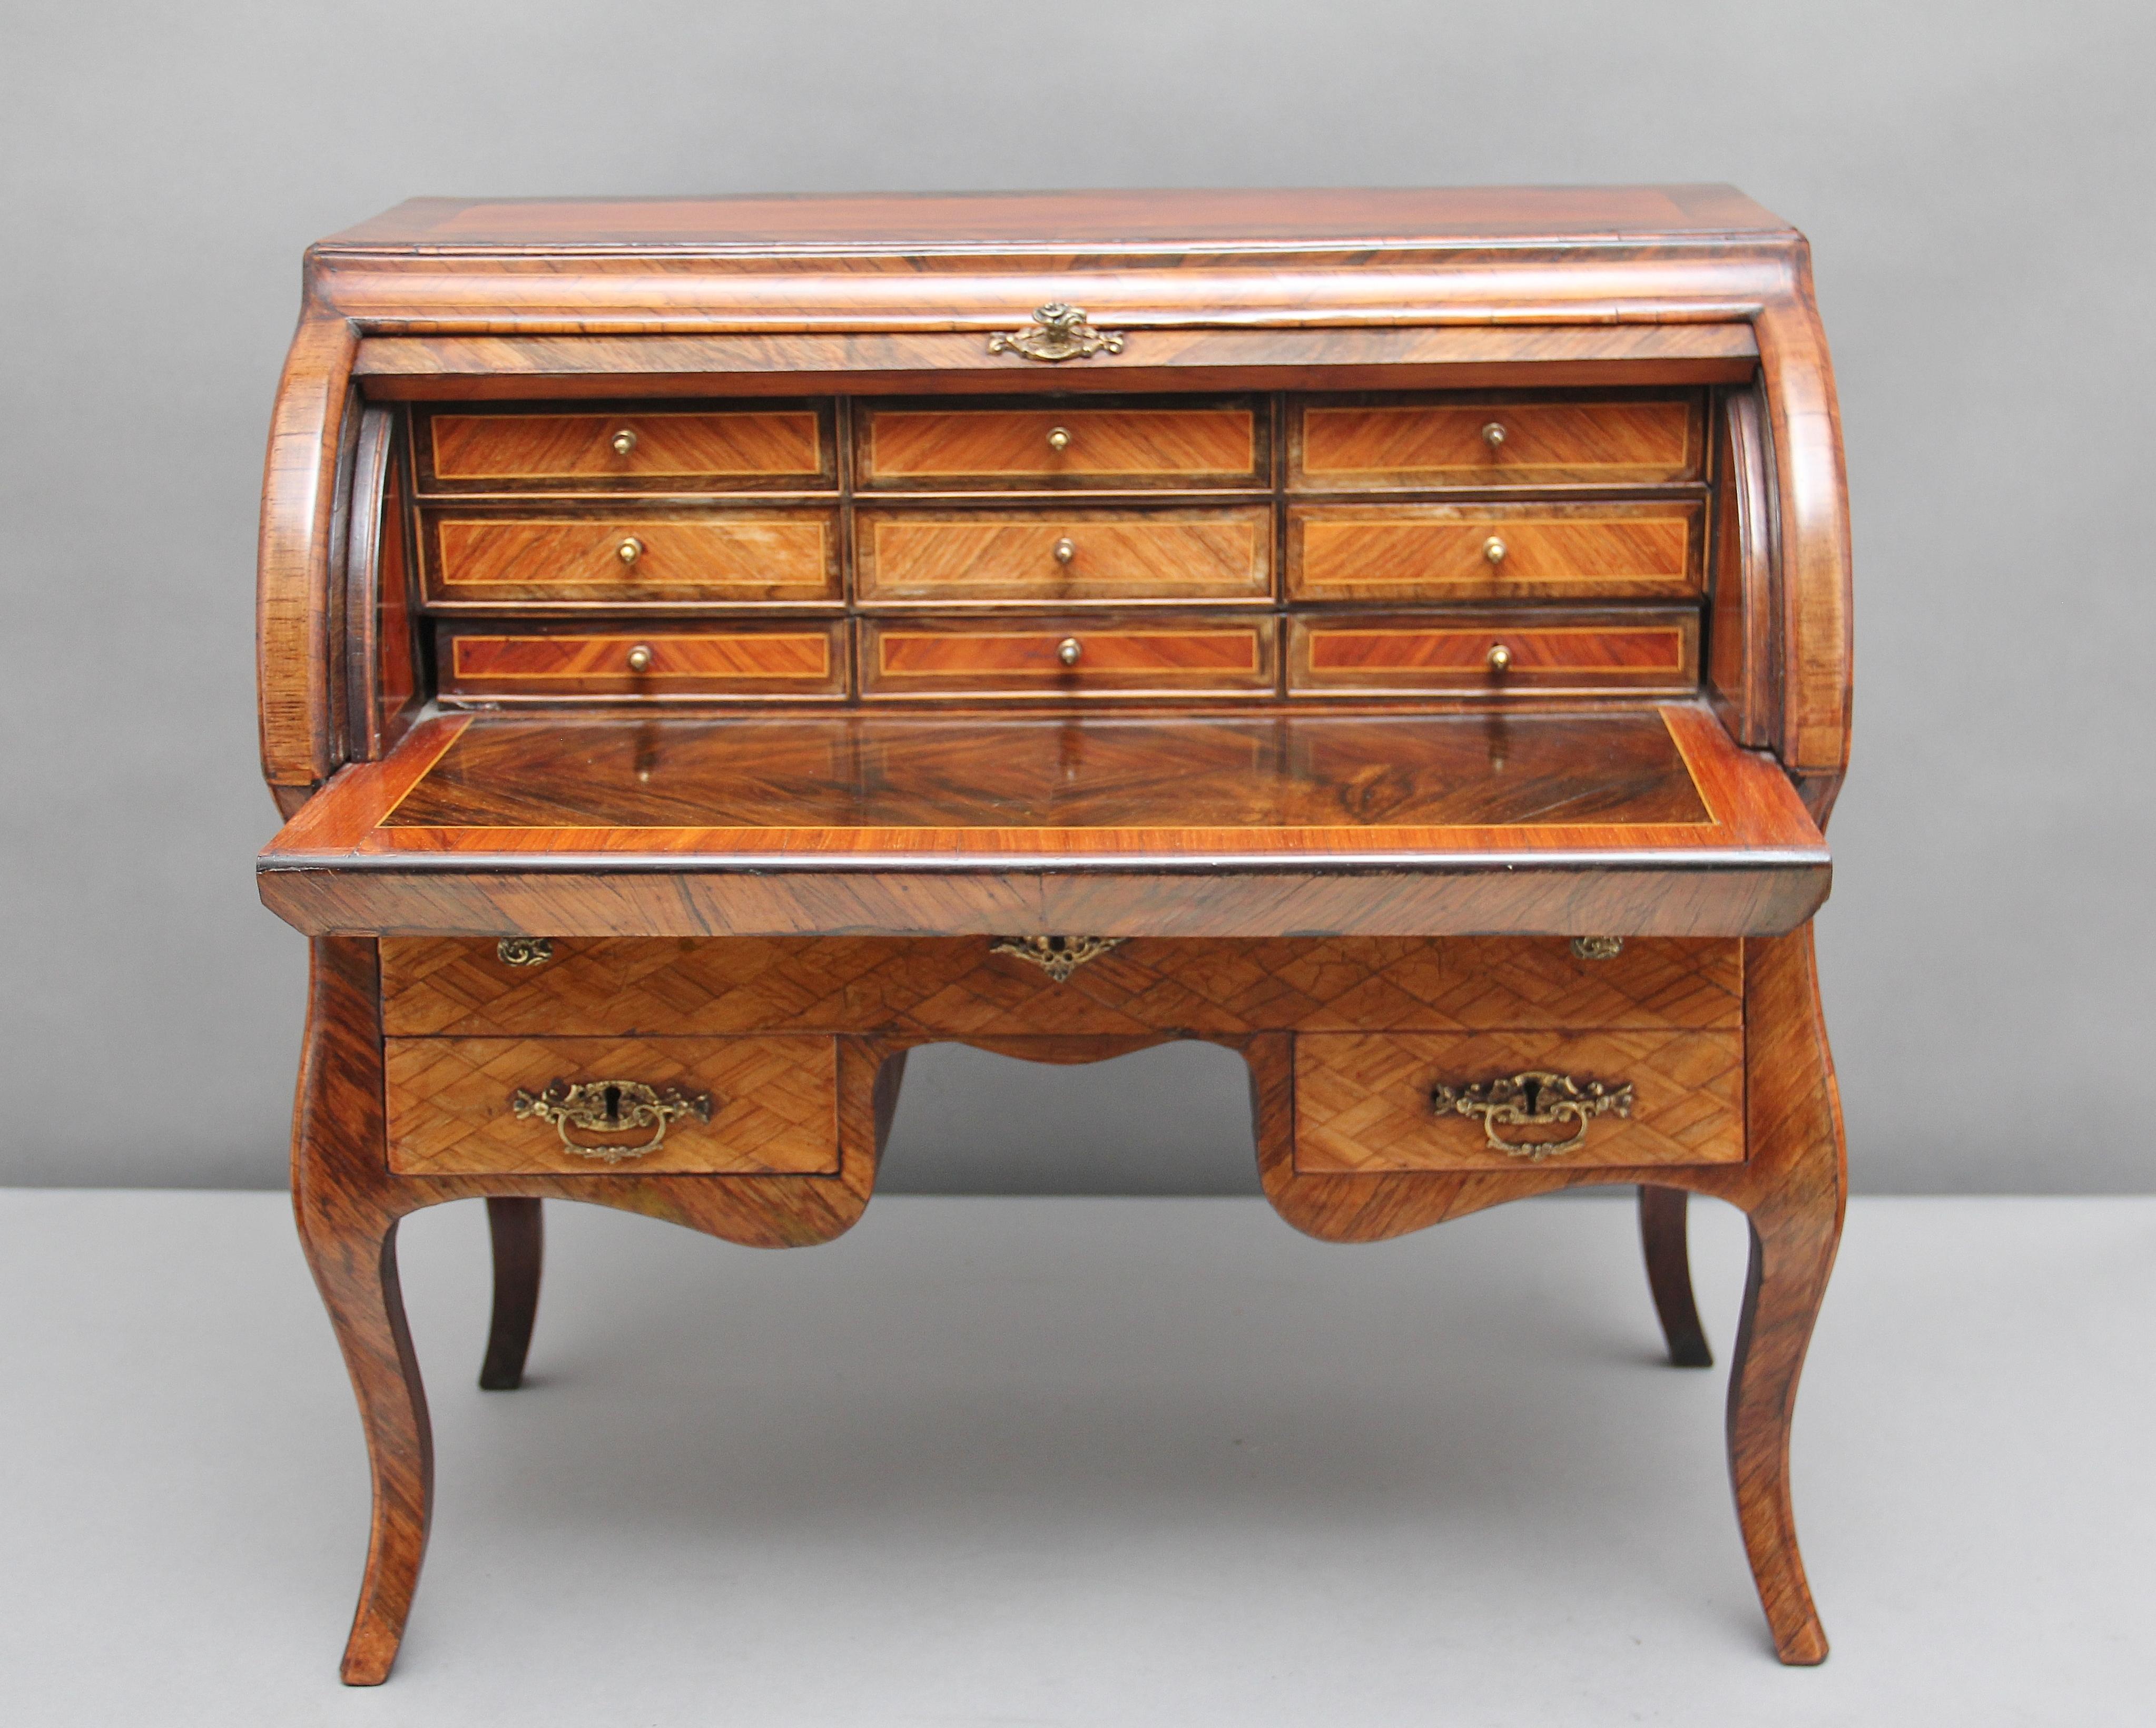 A superb quality early 19th century miniature bureau / desk made from Kingwood, tulipwood and other exotic woods, having a crossbanded top, parquetry inlaid bureau fall, drawer fronts and the sides of the desk, original brass handles and